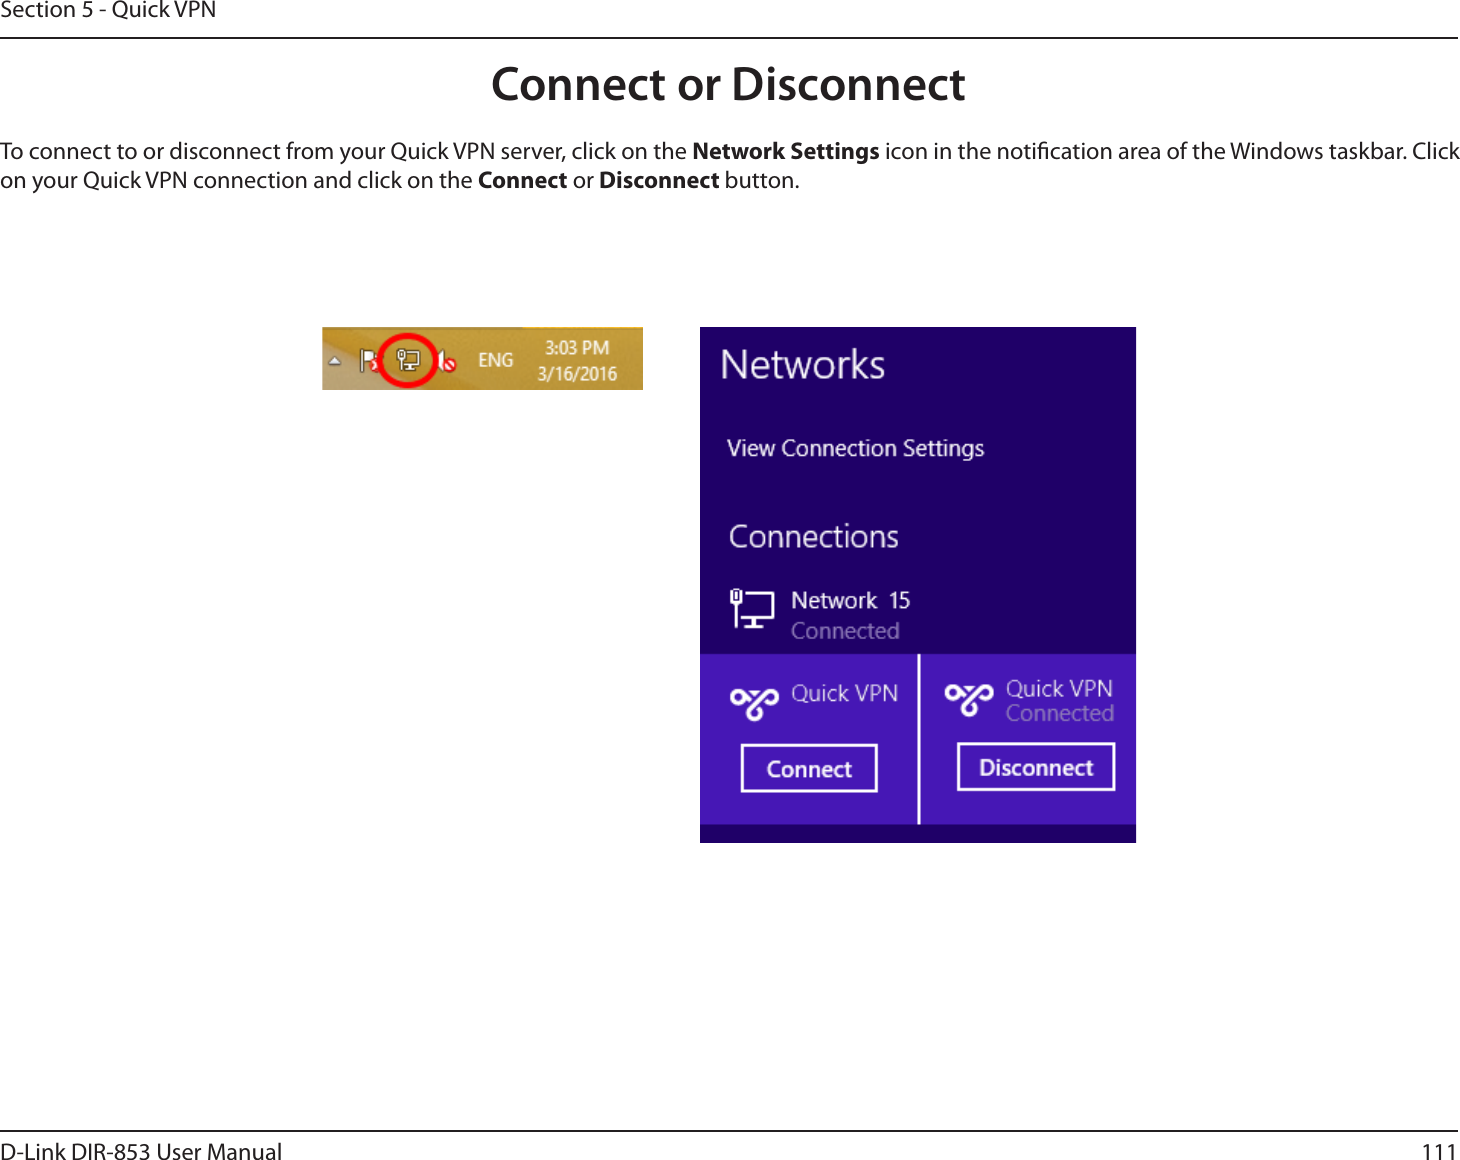 111D-Link DIR-853 User ManualSection 5 - Quick VPNConnect or DisconnectTo connect to or disconnect from your Quick VPN server, click on the Network Settings icon in the notication area of the Windows taskbar. Click on your Quick VPN connection and click on the Connect or Disconnect button.